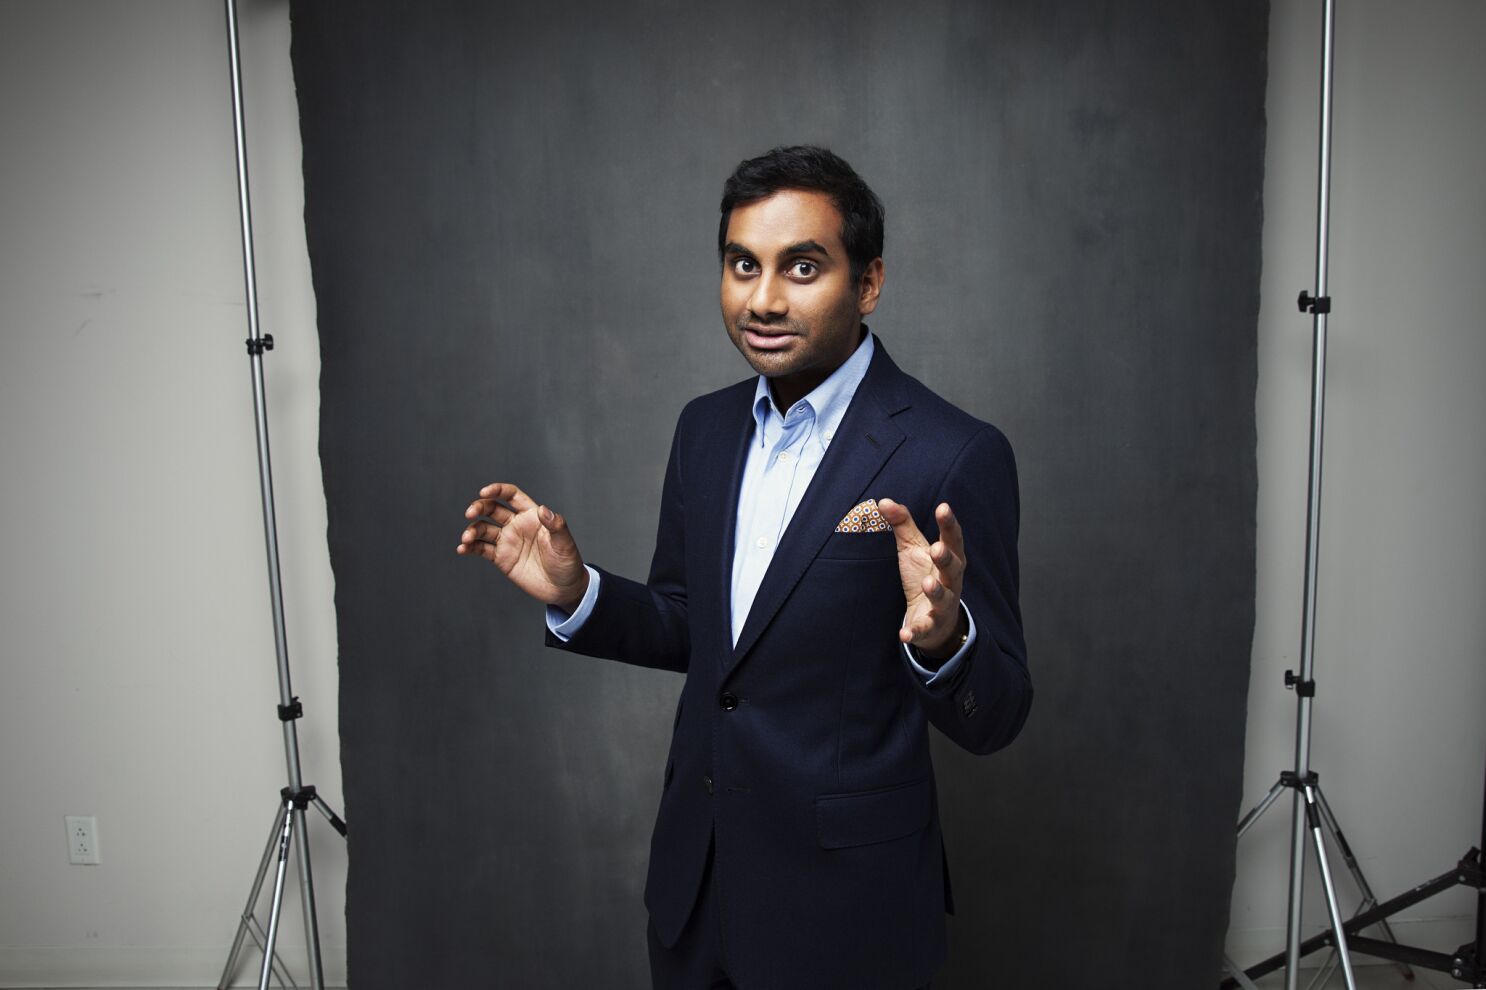 Aziz Ansari's fight against 'hacky ethnic jokes' fires his new Netflix show  'Master of None' - Los Angeles Times